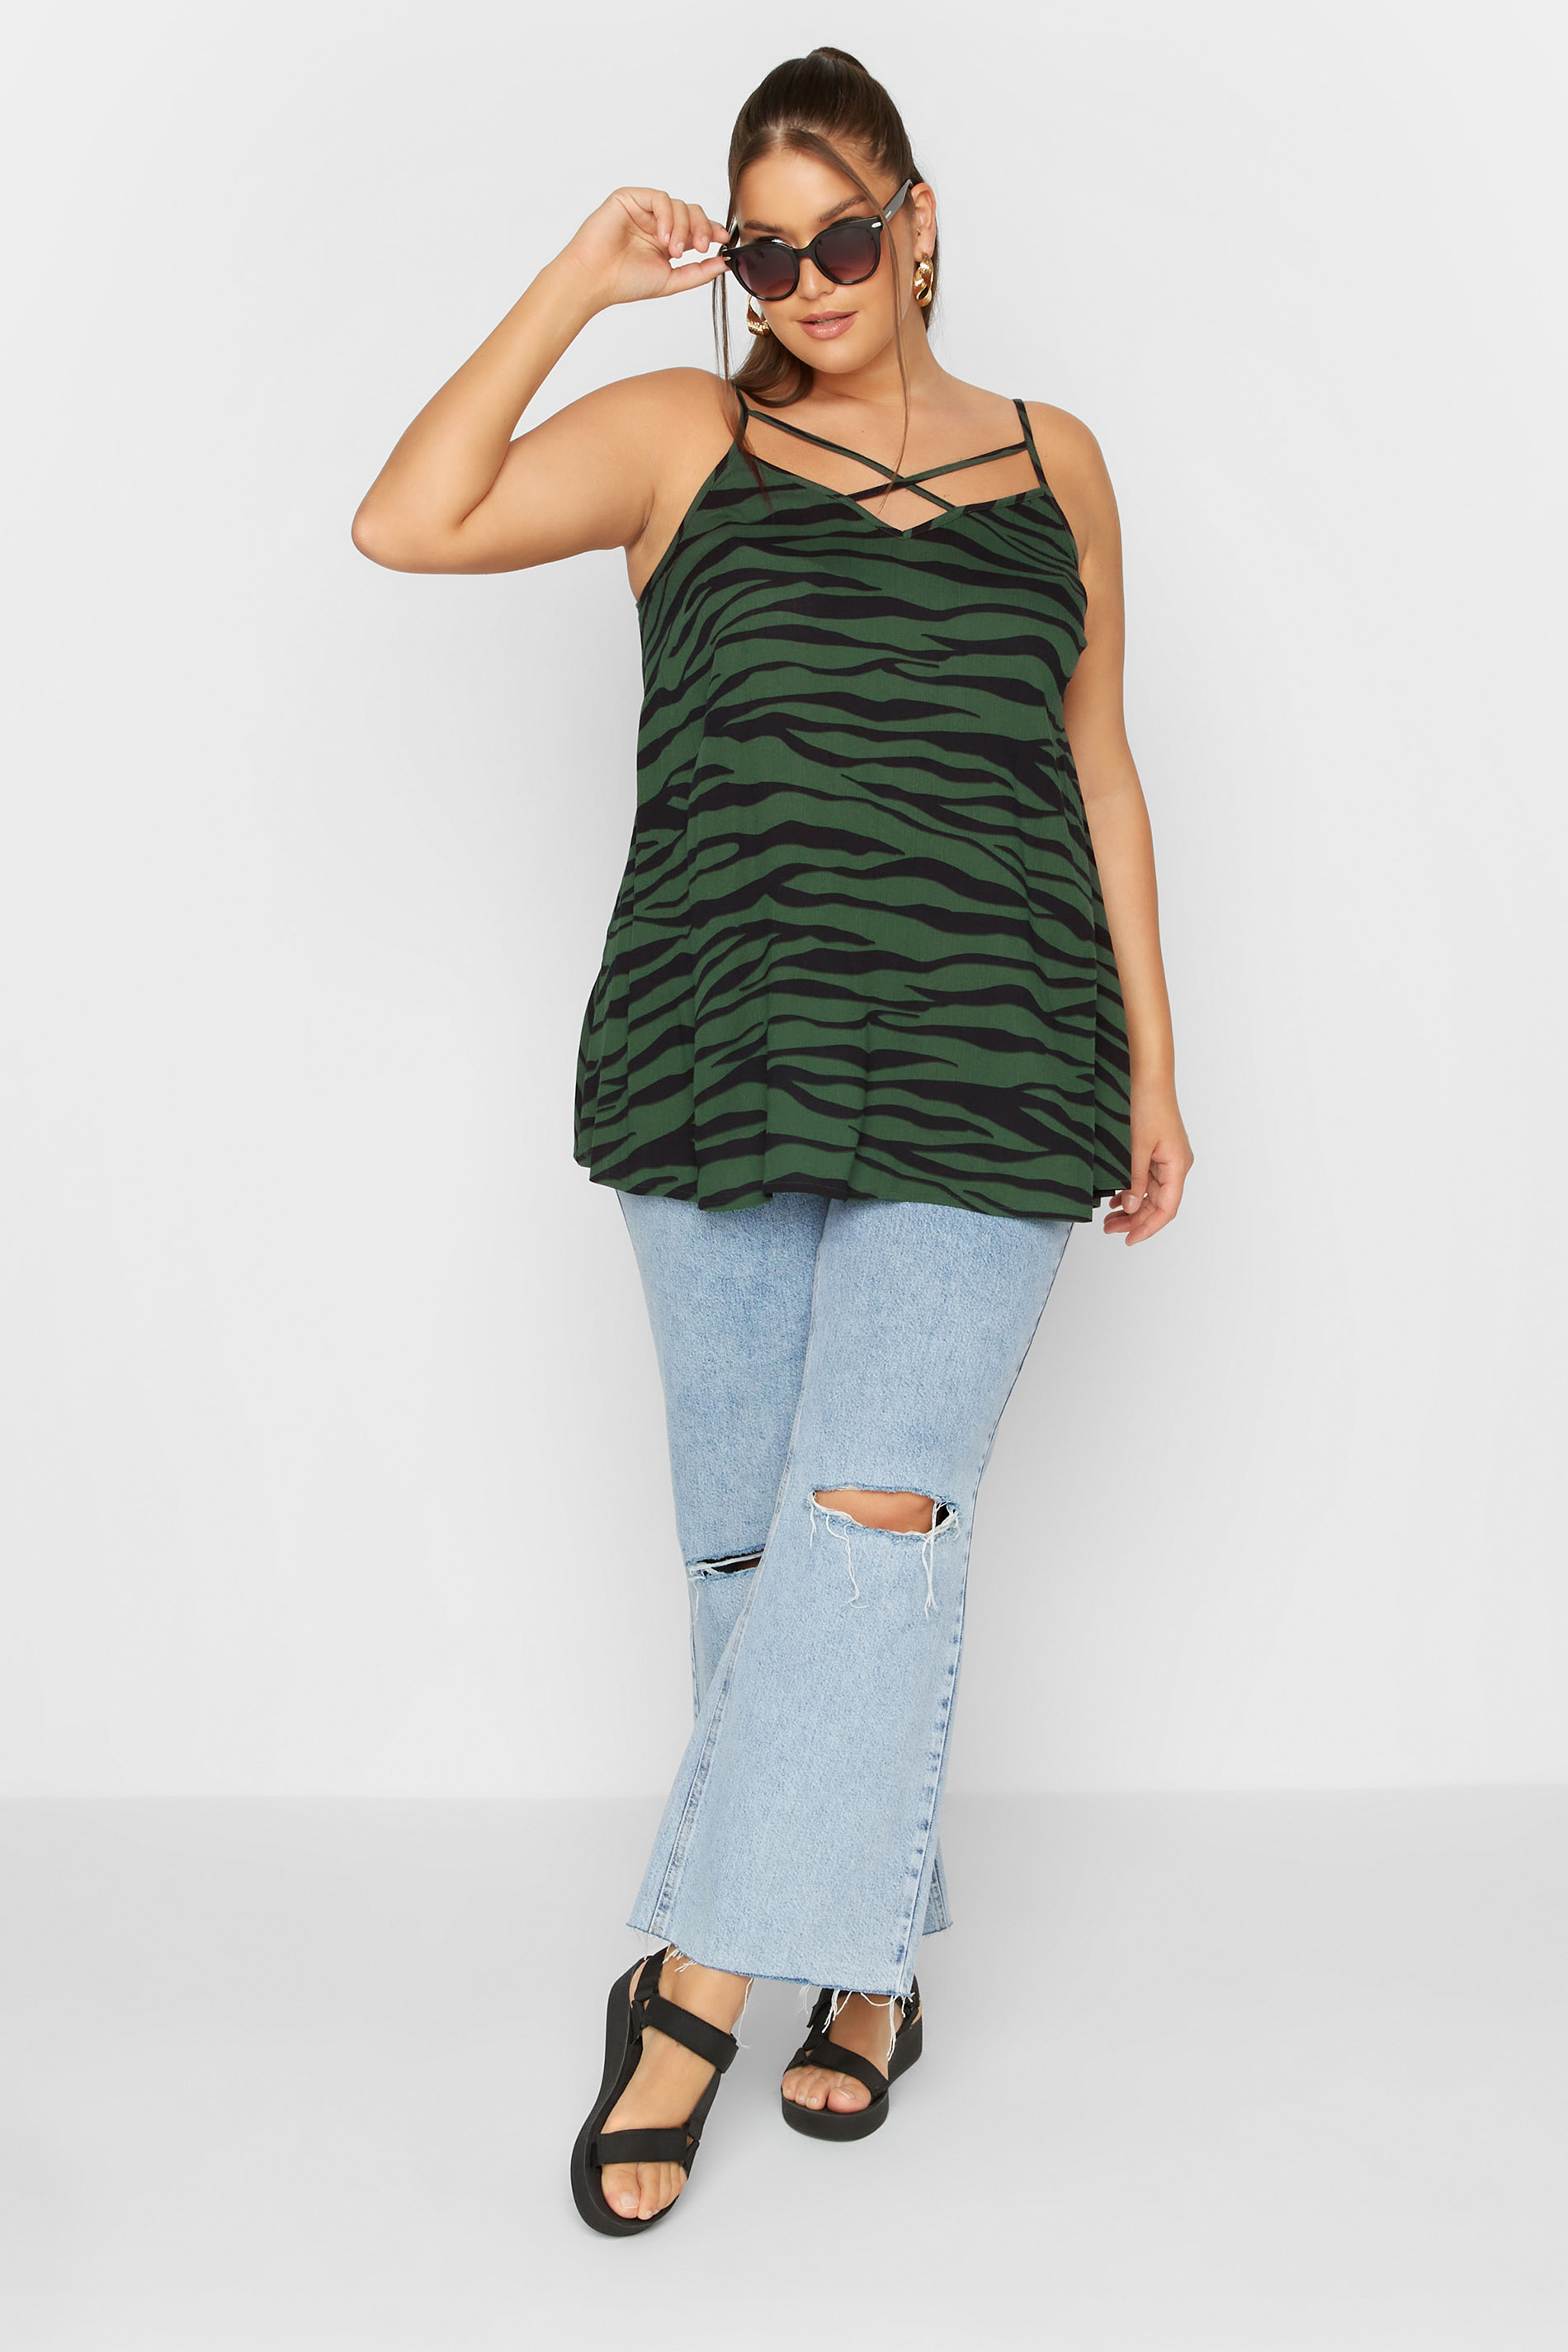 Plus Size LIMITED COLLECTION Green Zebra Print Strappy Swing Cami Top | Yours Clothing 2